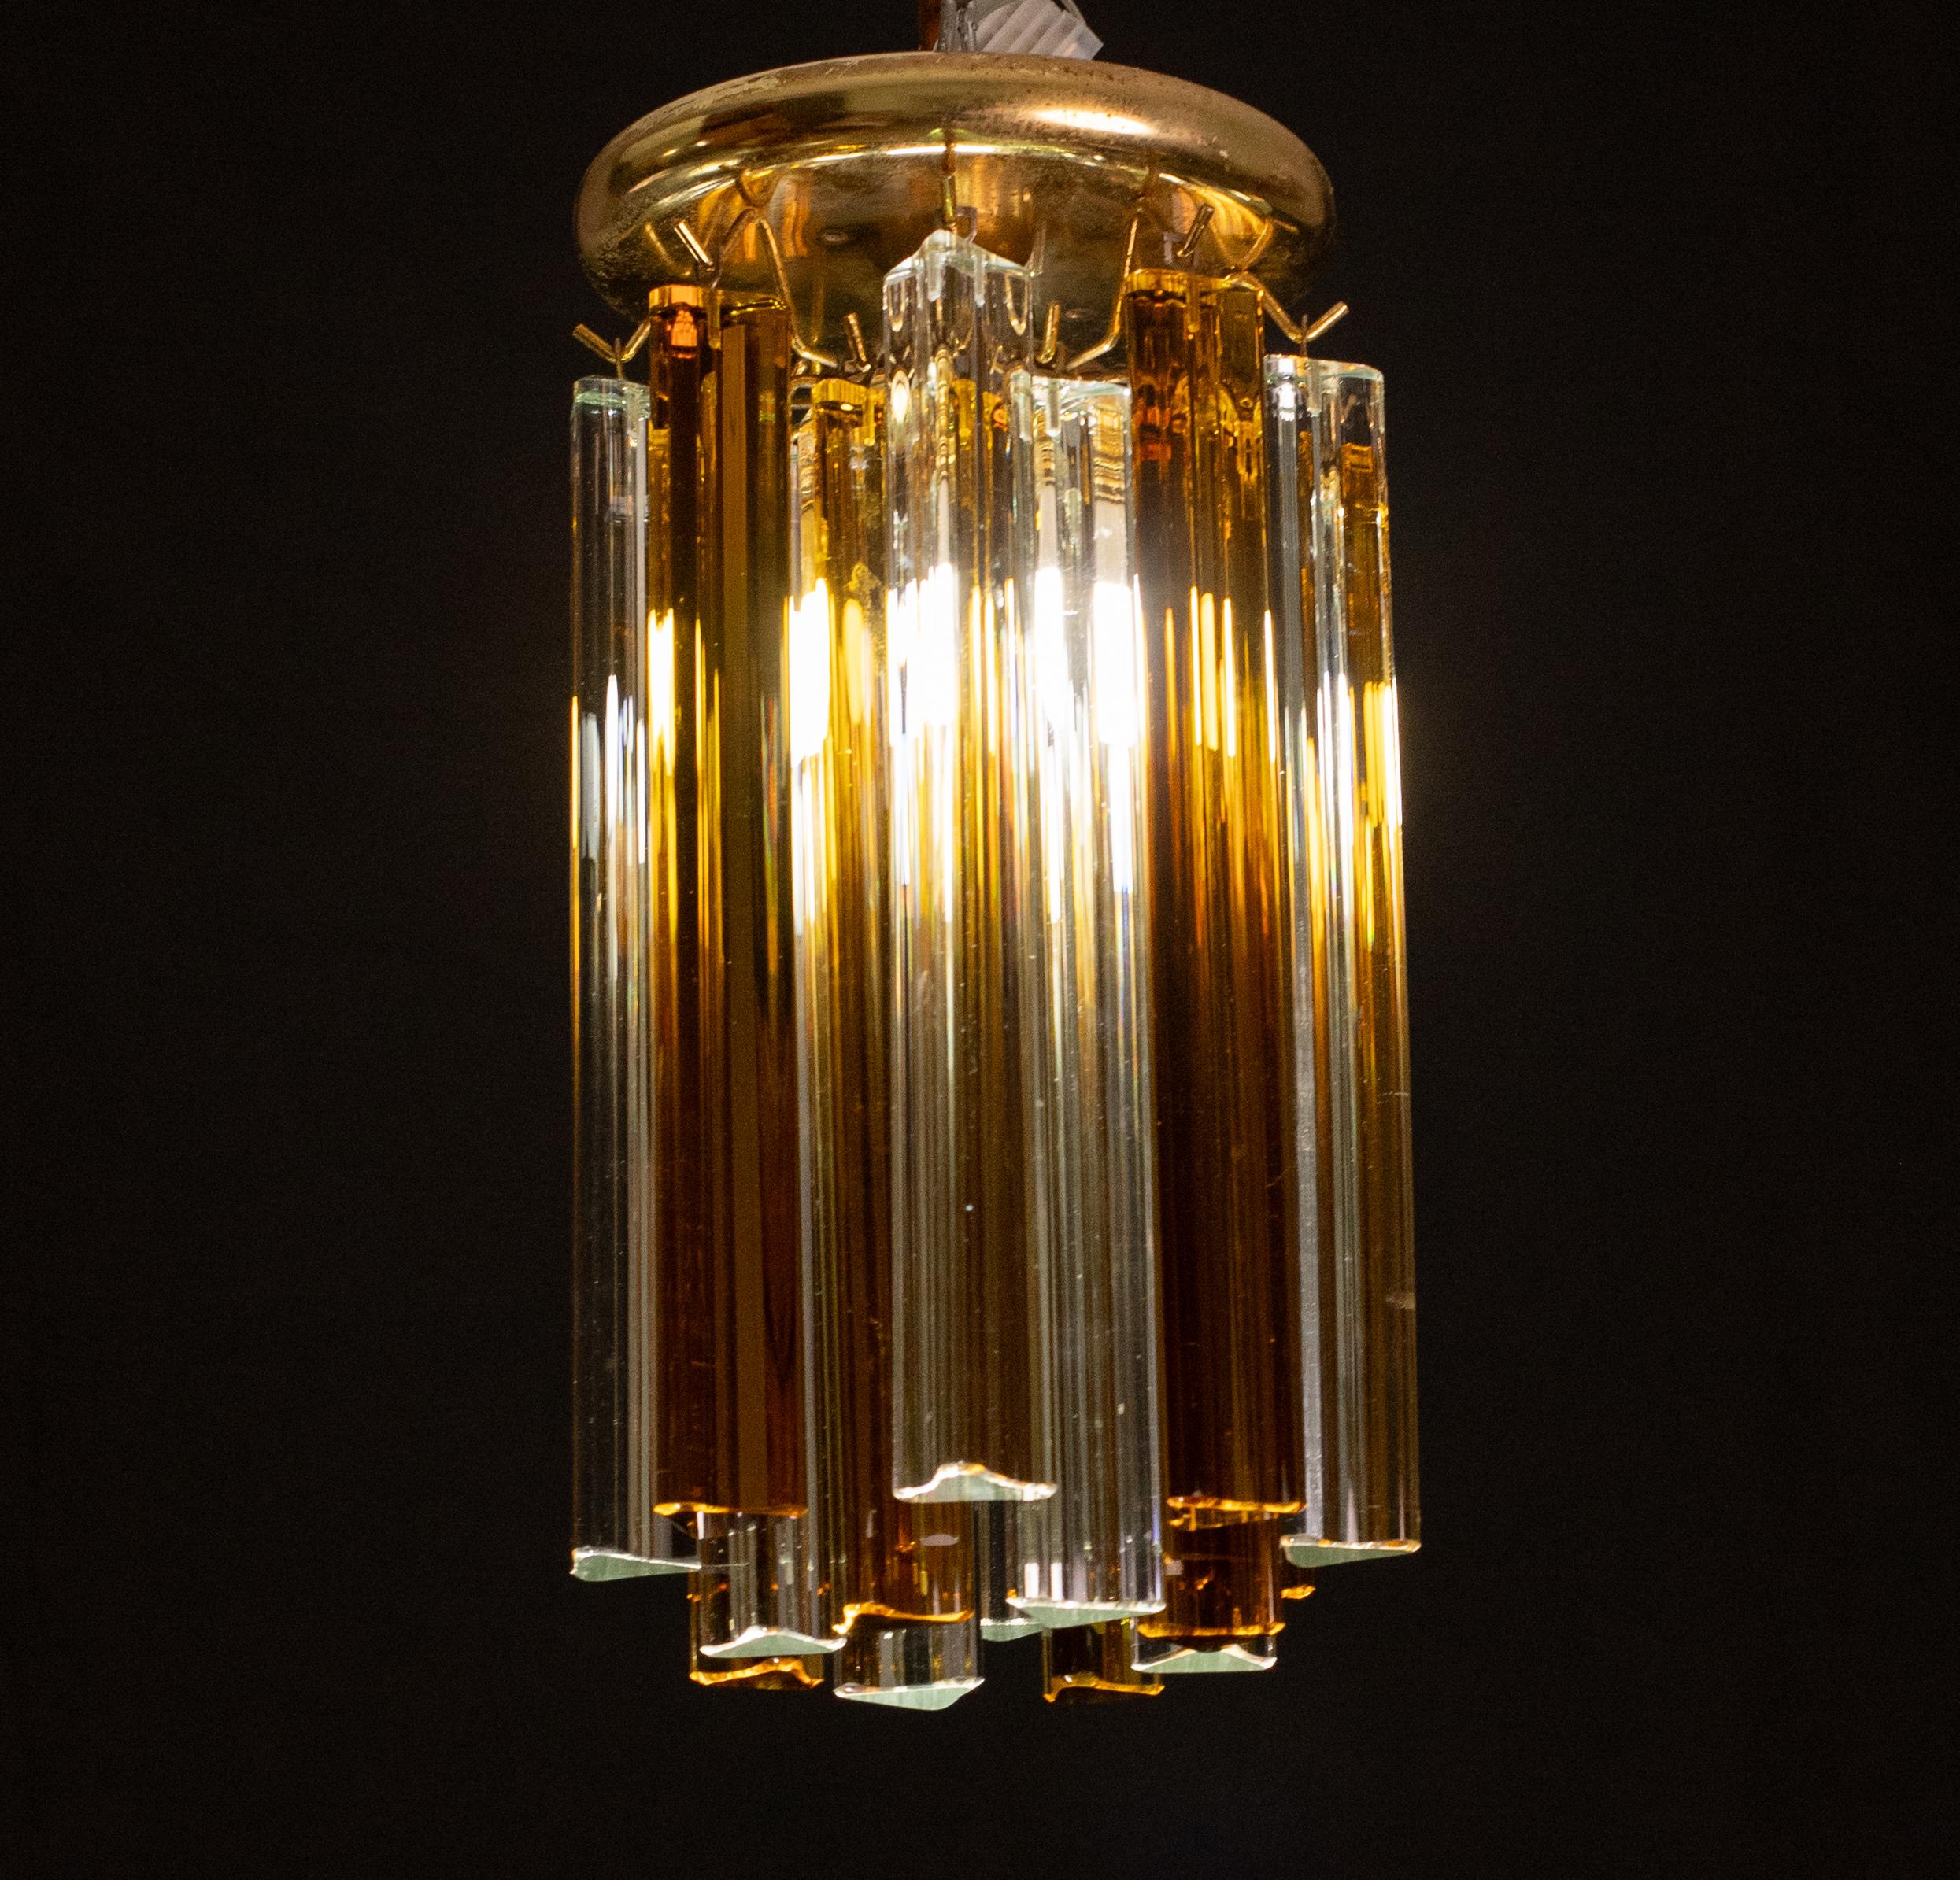 Stunning ceiling lamps attributed to Venini formed of triedri amber and trasparent.
mounts a light fitting.
Height 23 centimeters, diameter 30 centimeters.
Period: 1960